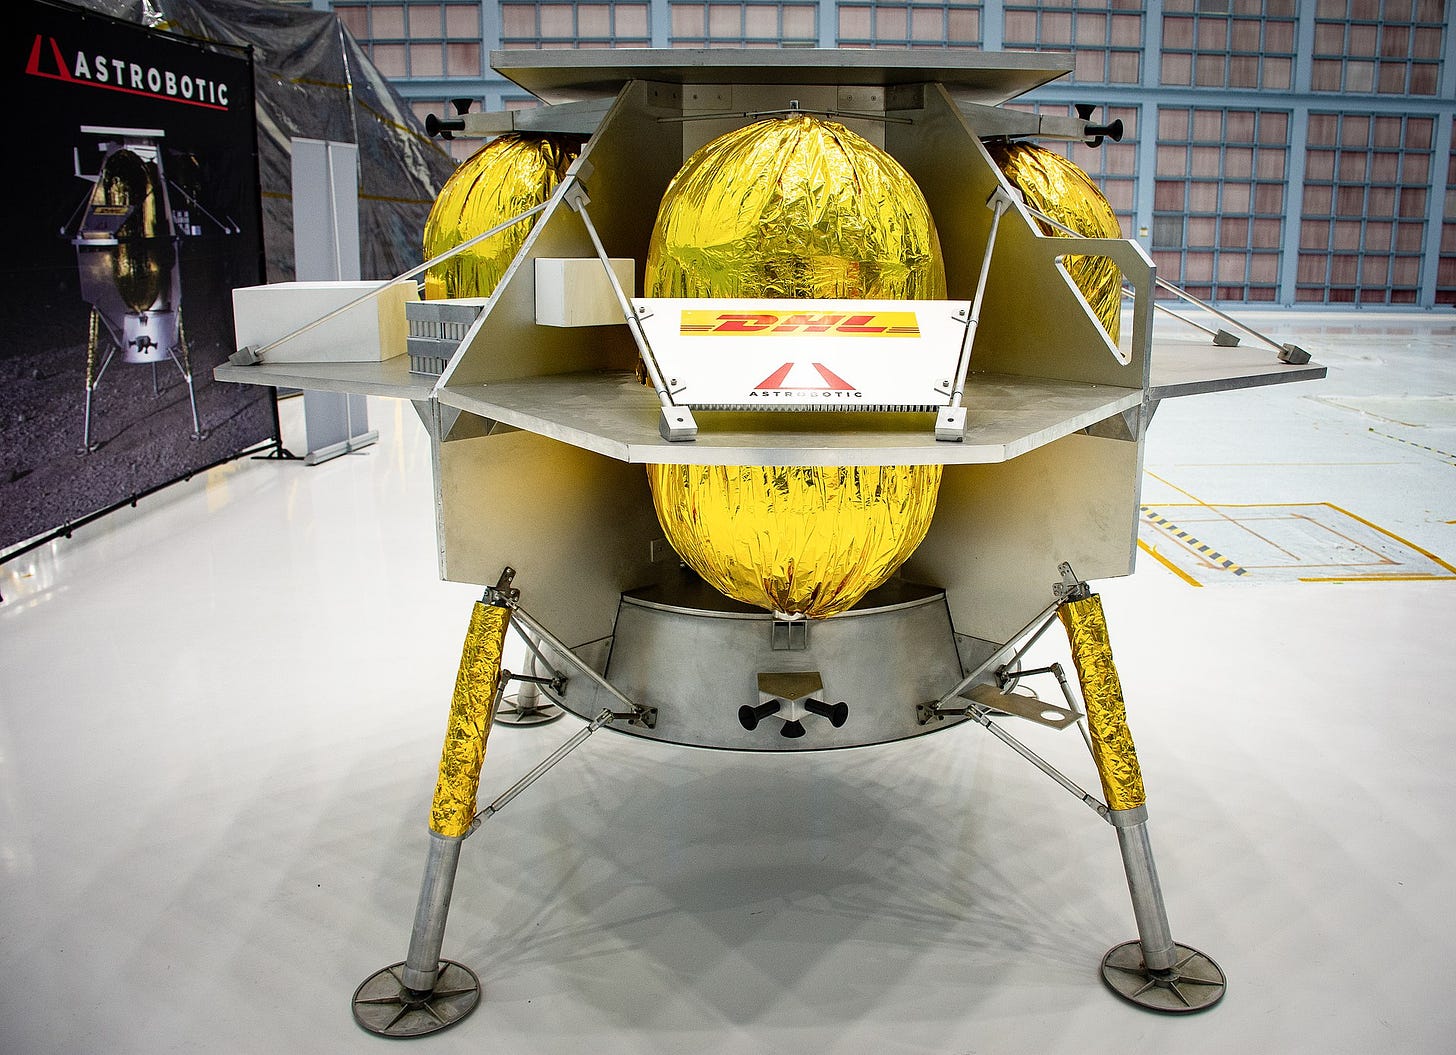 In a factory, a high-tech lunar lander. A metallic structure on four legs with yellow foil balloon looking compartments